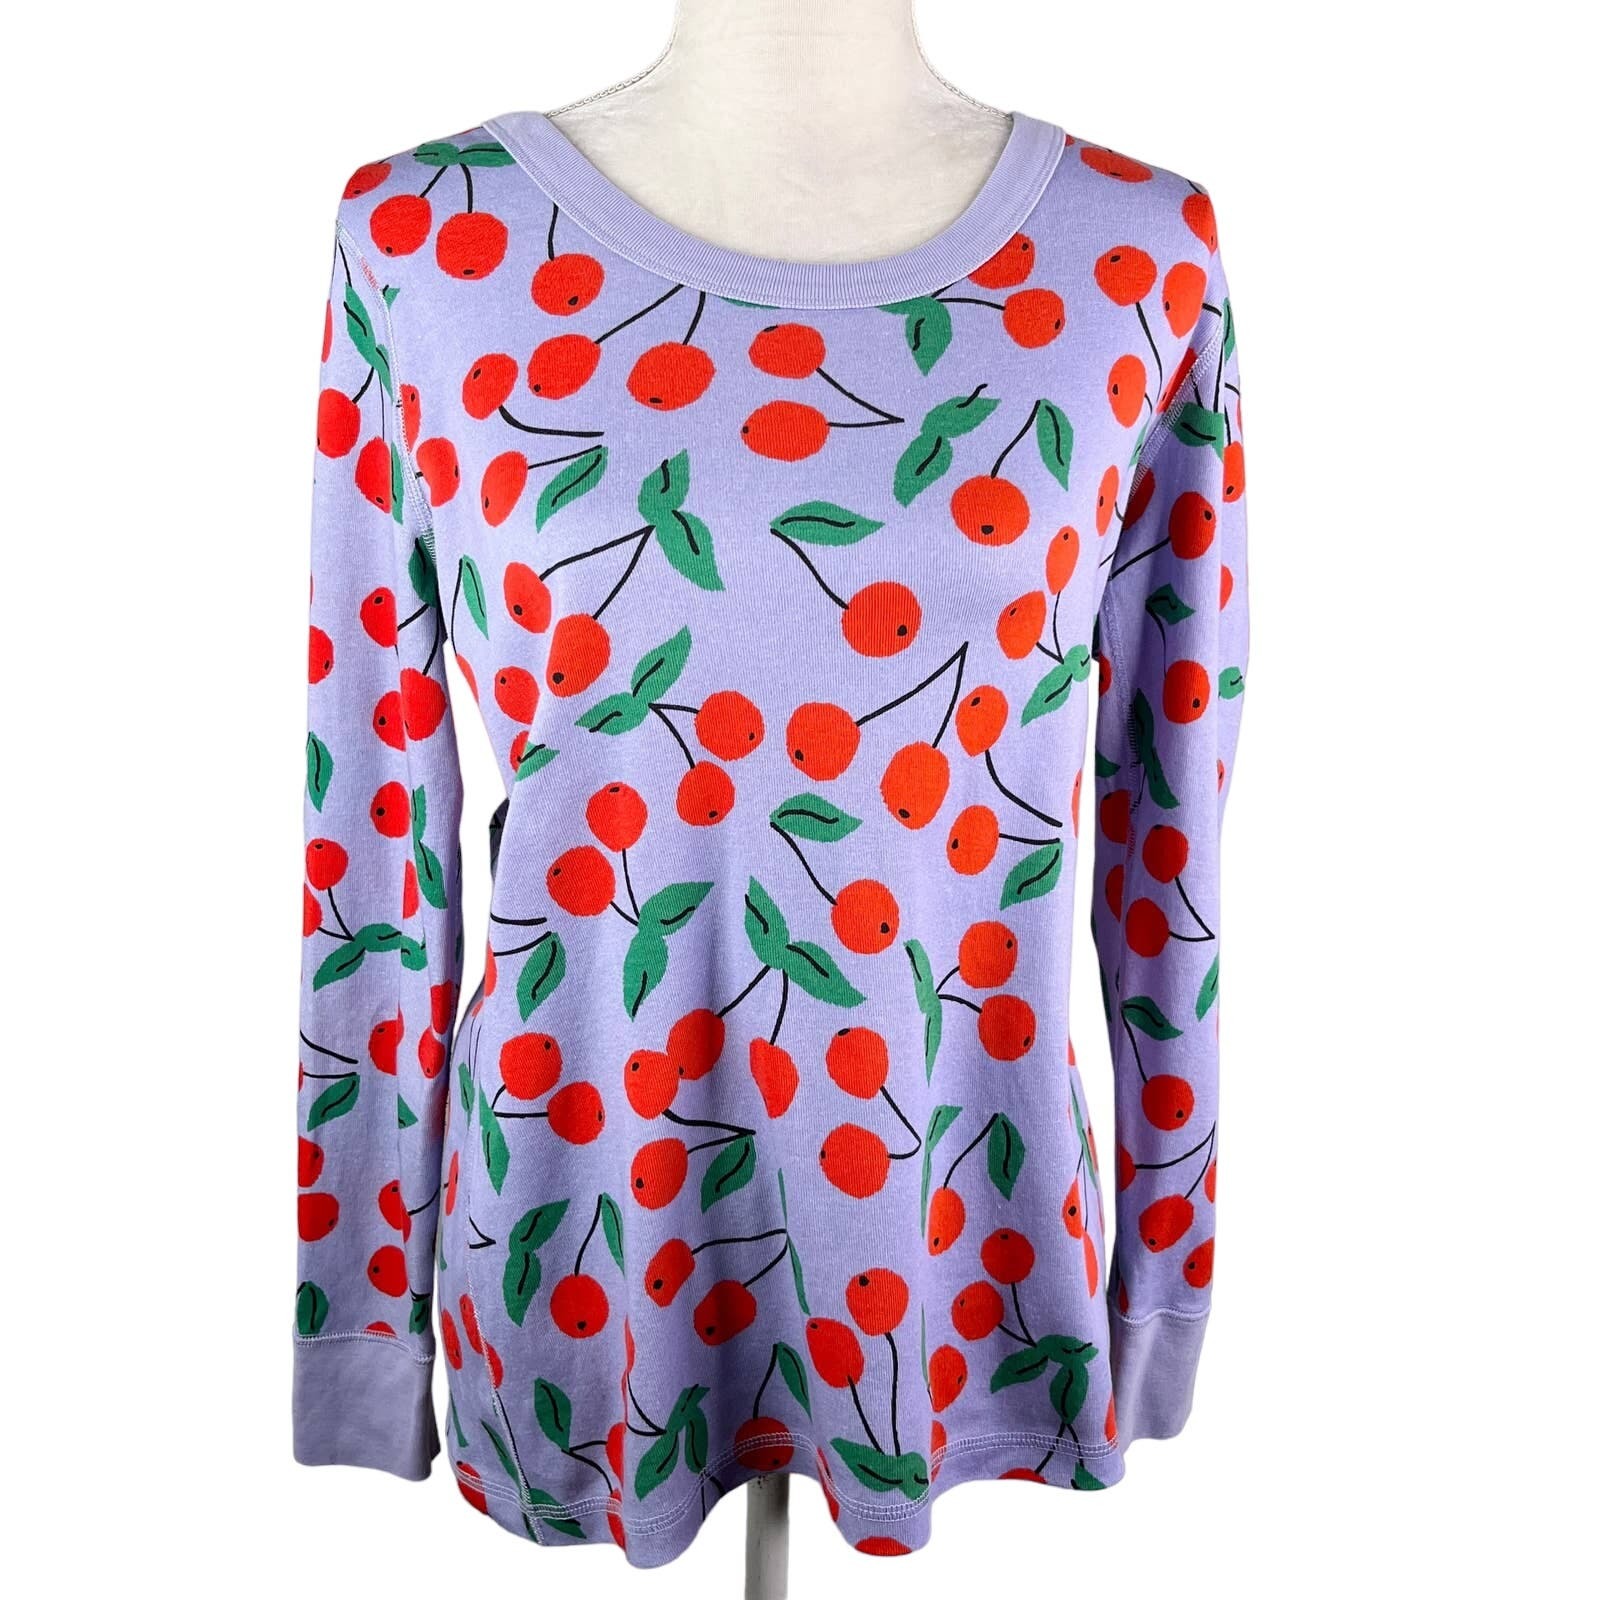 Primary image for Hanna Andersson Long Sleeve Top Girls Large Cherry Organic Cotton